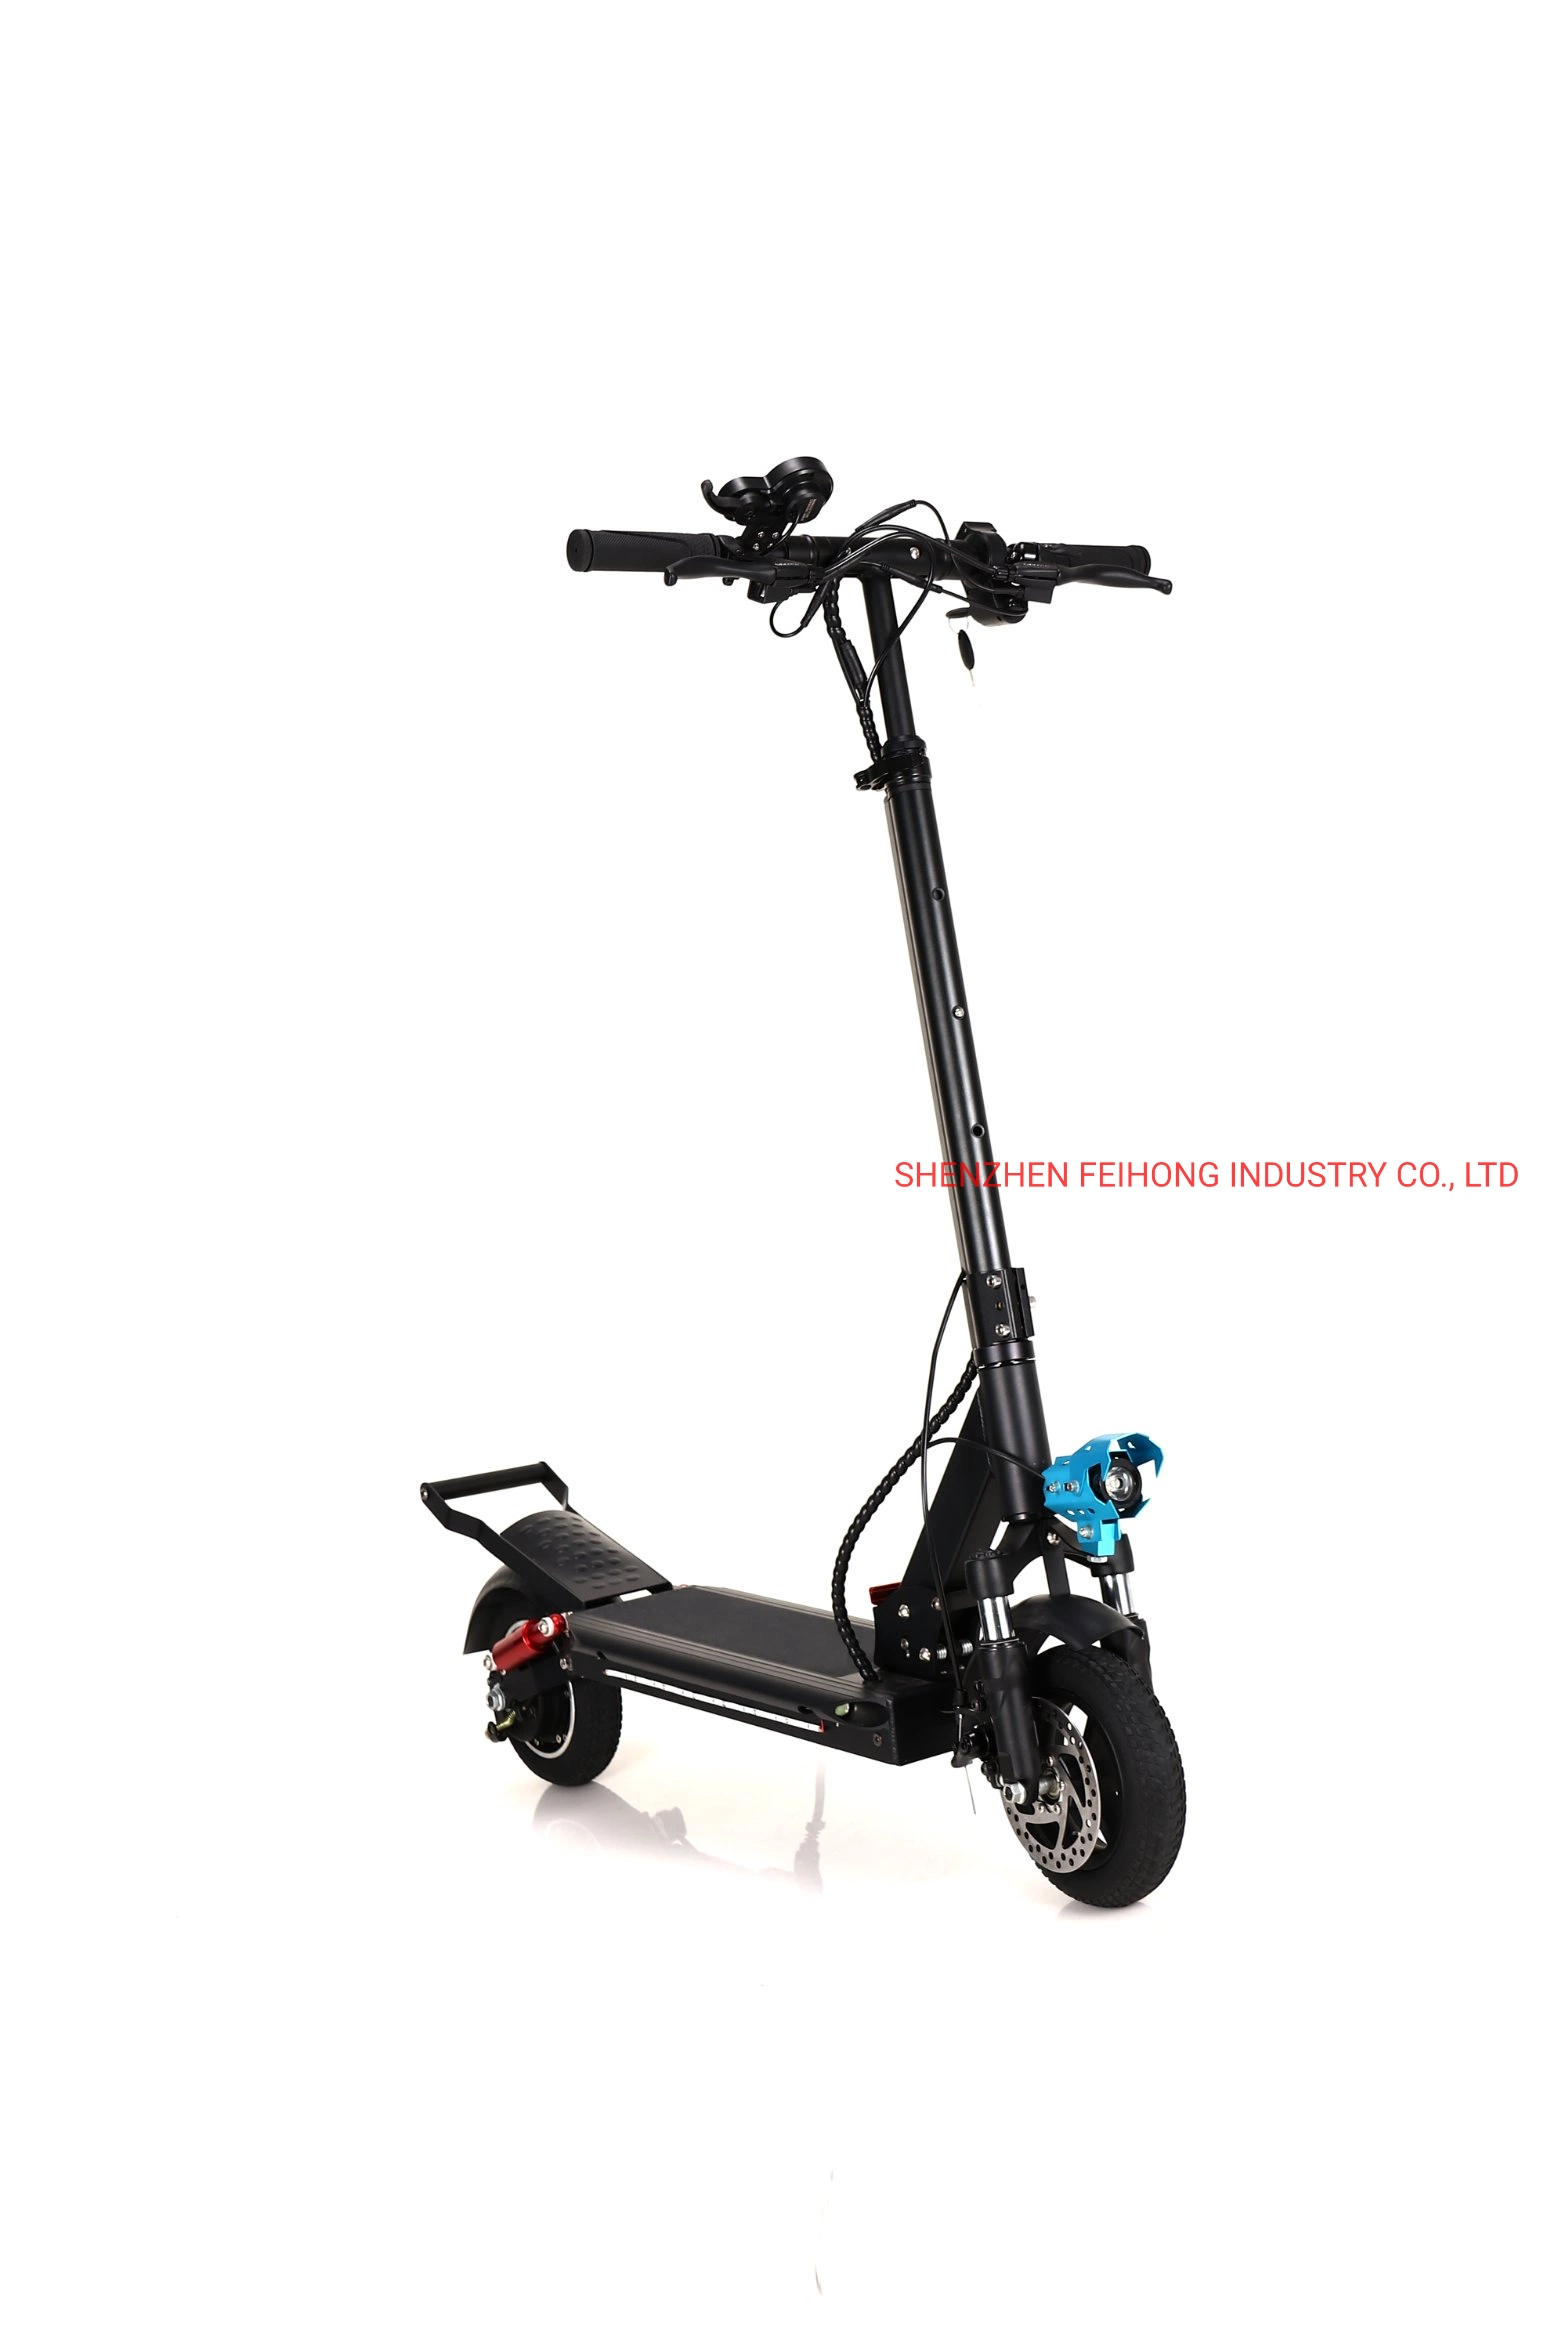 10inch Motorcycle Electric Scooter Bicycle Electric Bike Electric Motorcycle Scooter Motor Scooter Mobility Scooter Adult Scooters Folding Scooters Eks-37